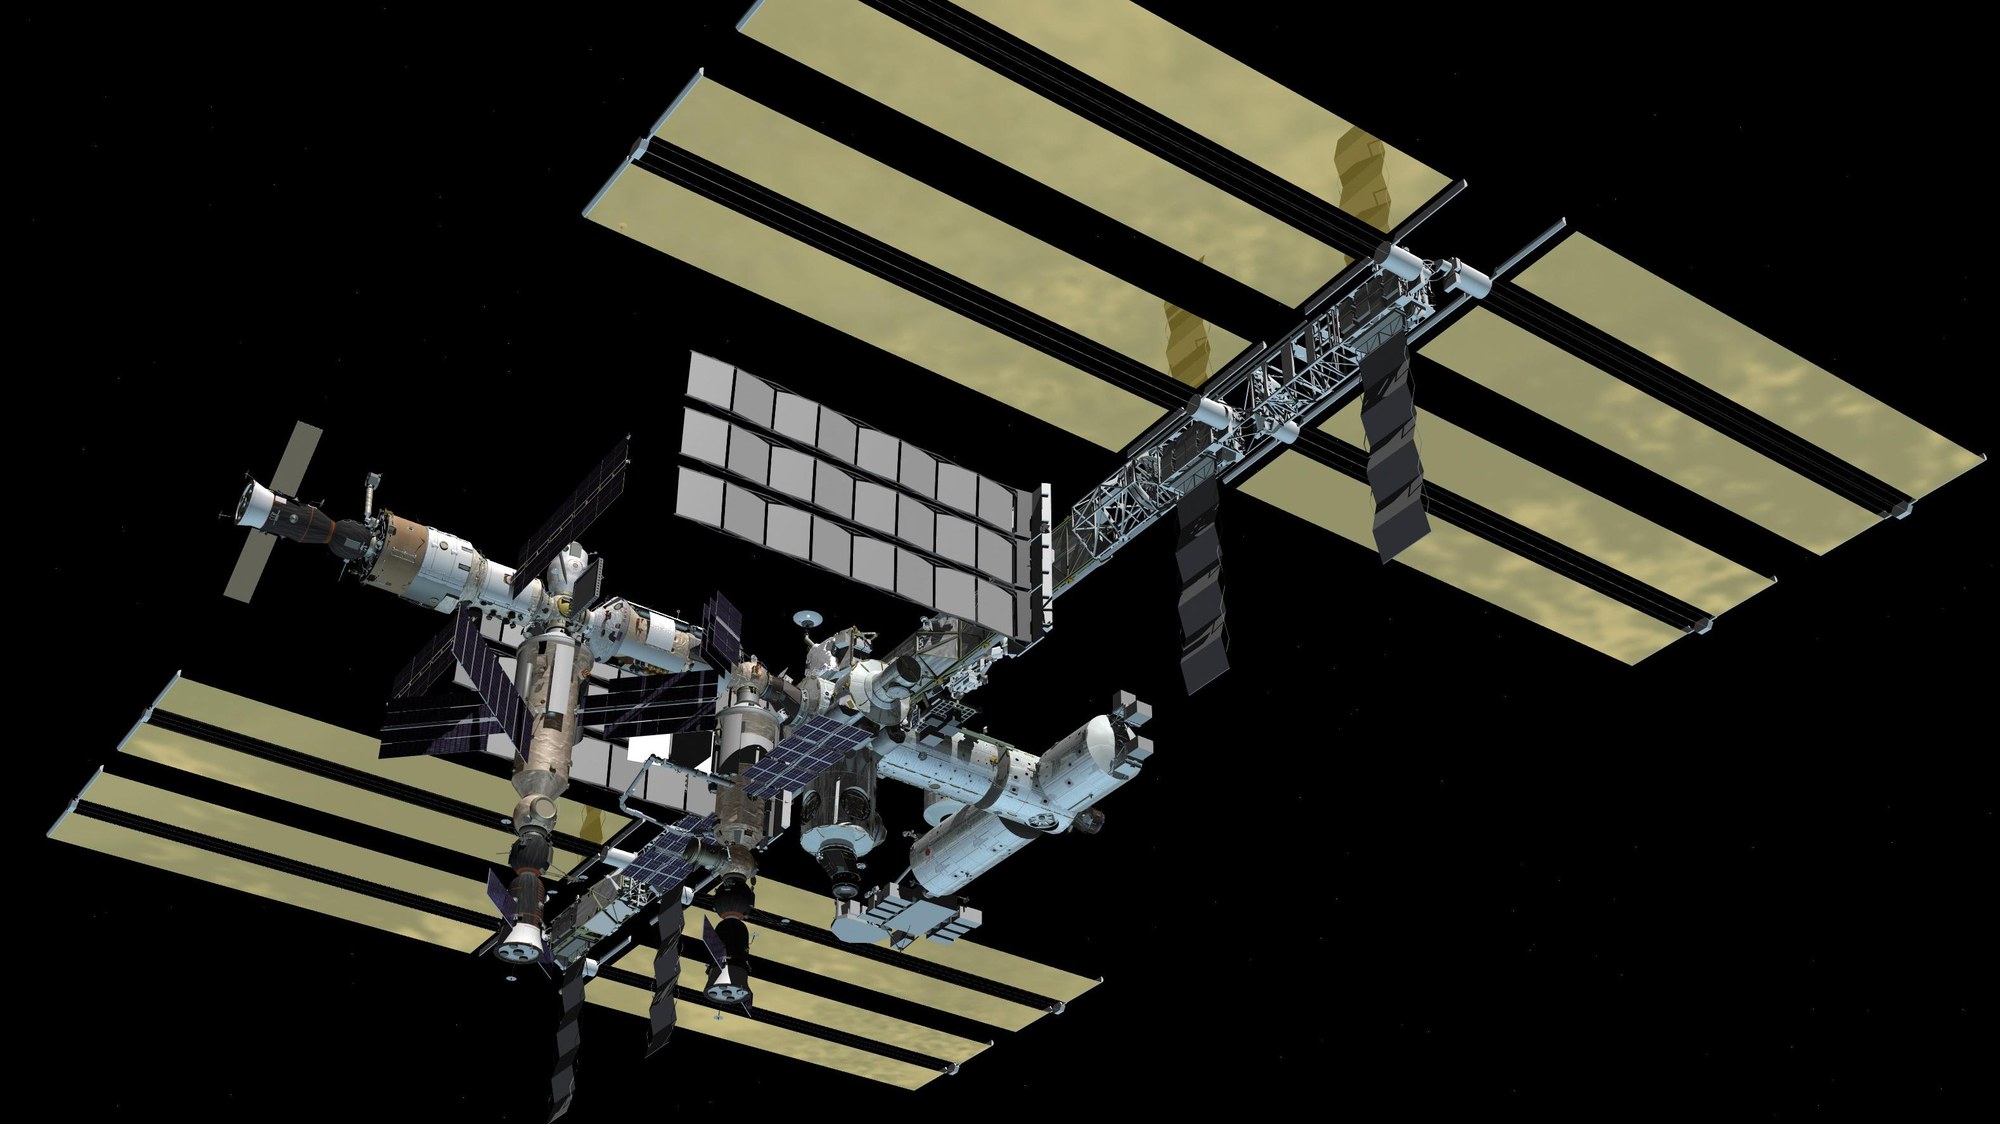 The ISS after assembly work is completed